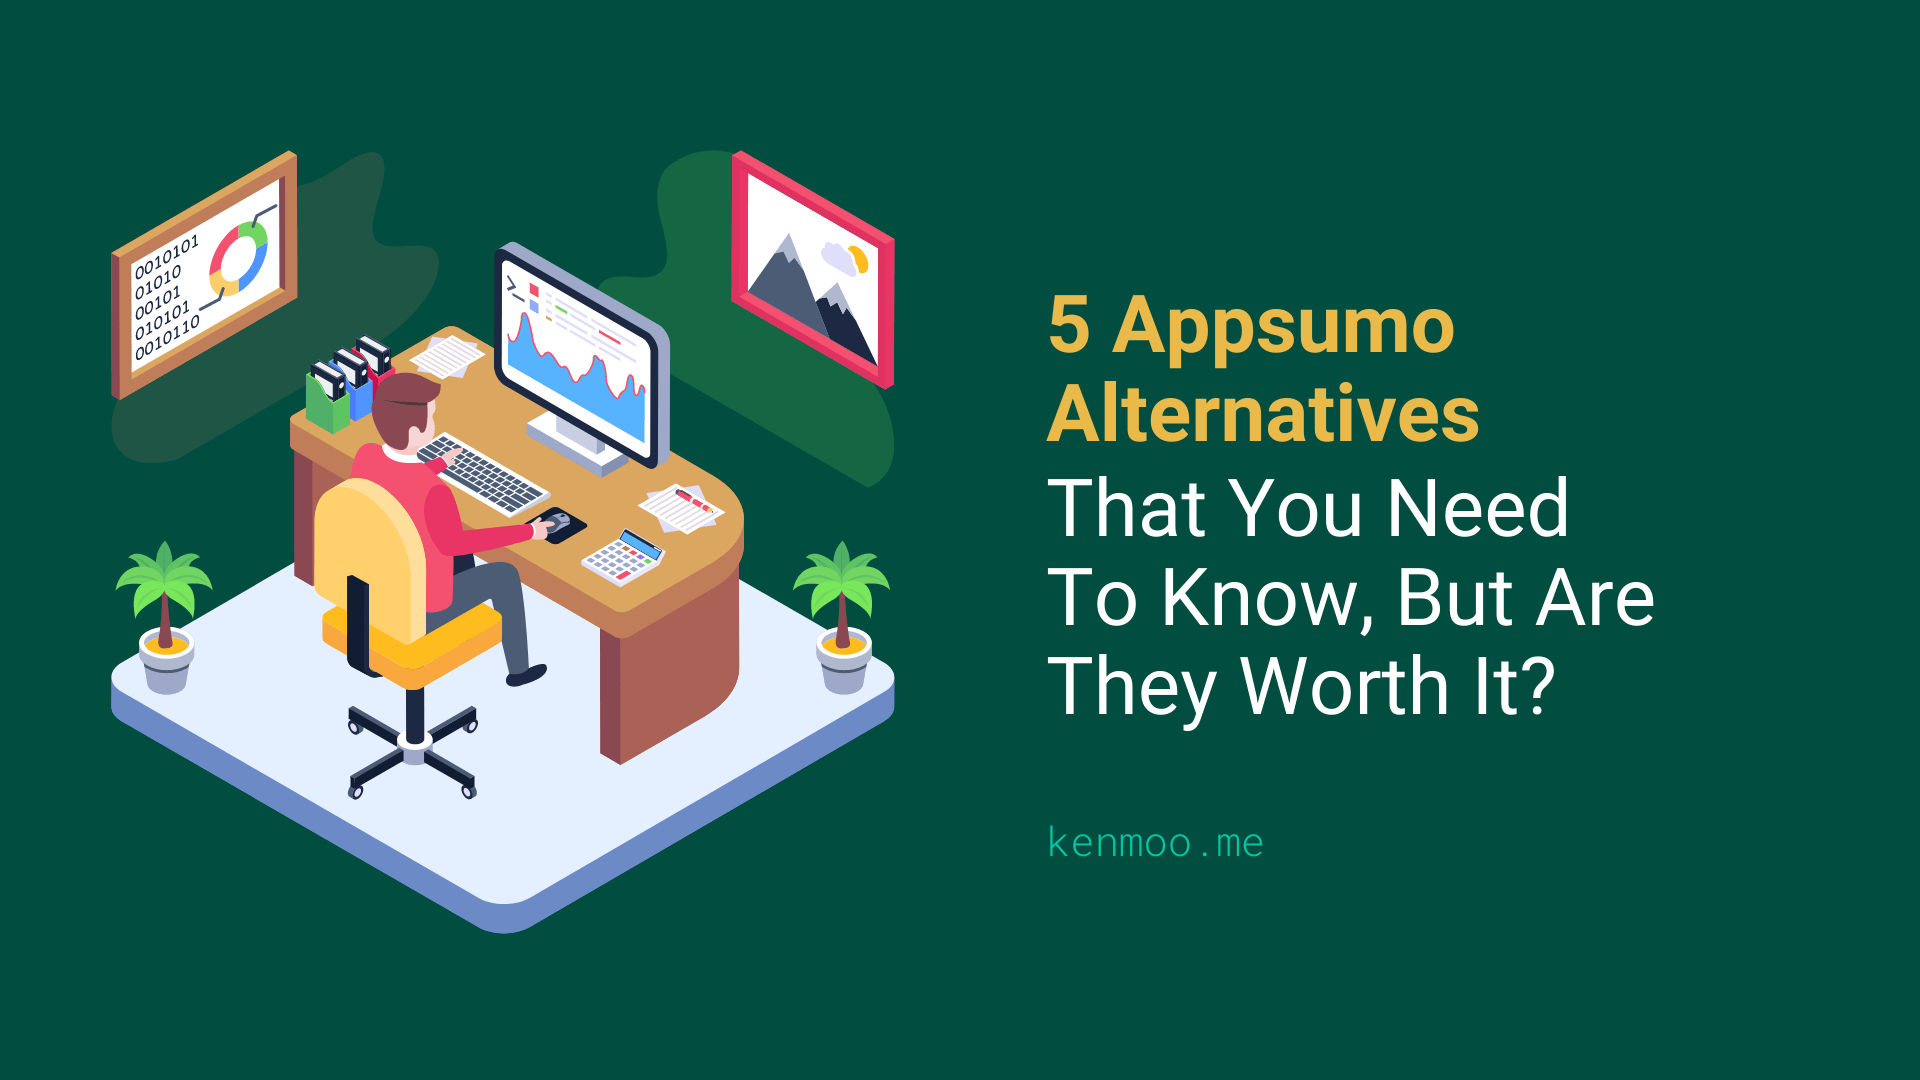 9 Appsumo Alternatives That You Need To Know, But Are They Worth It?